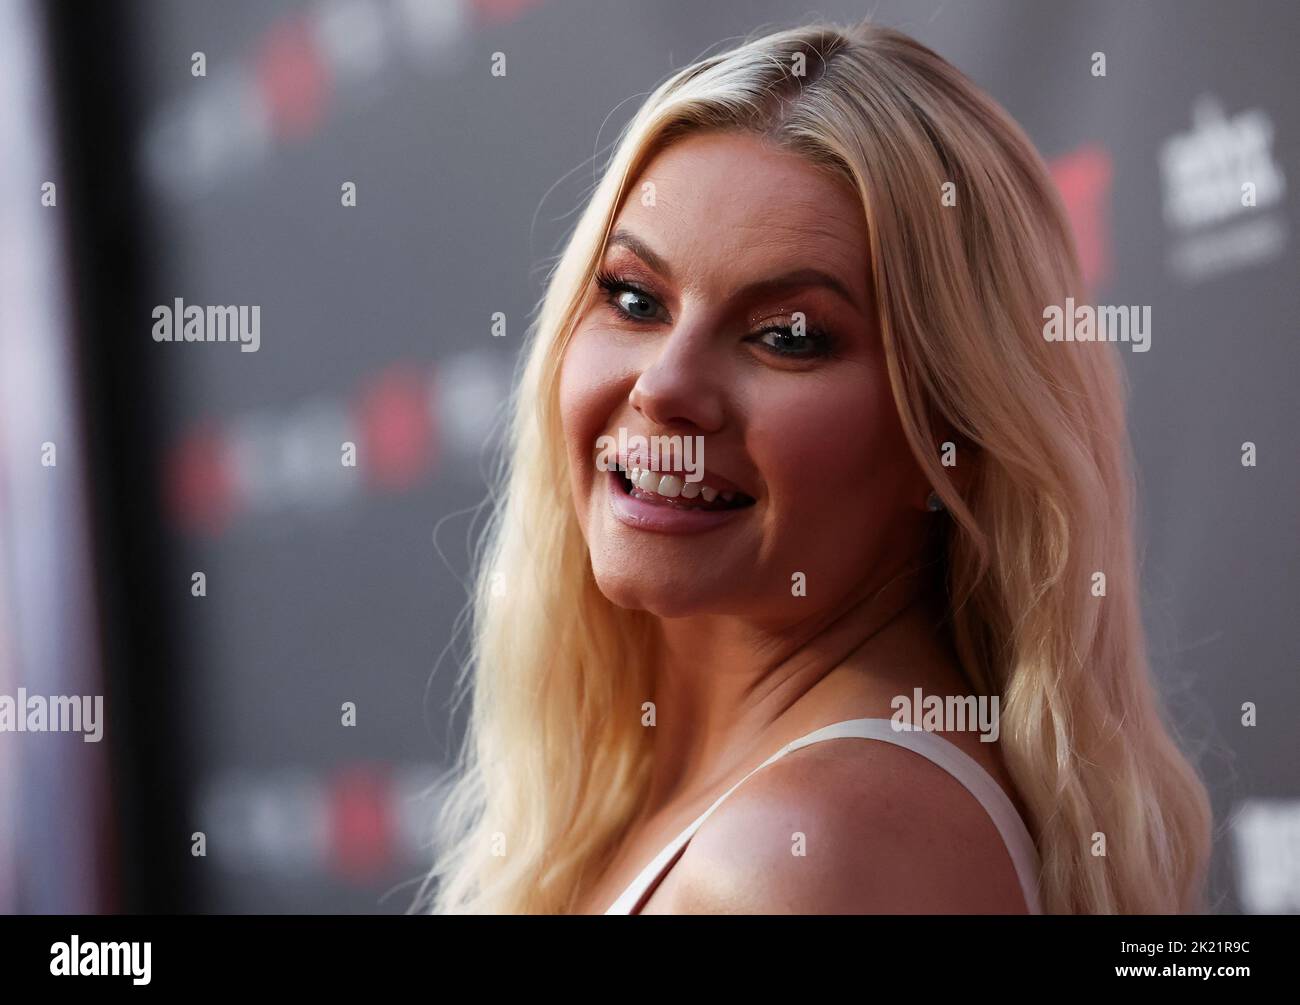 Cast member Elisha Cuthbert attends a premiere for the film 'Bandit' in Los Angeles, California, U.S. September 21, 2022.  REUTERS/Mario Anzuoni Stock Photo